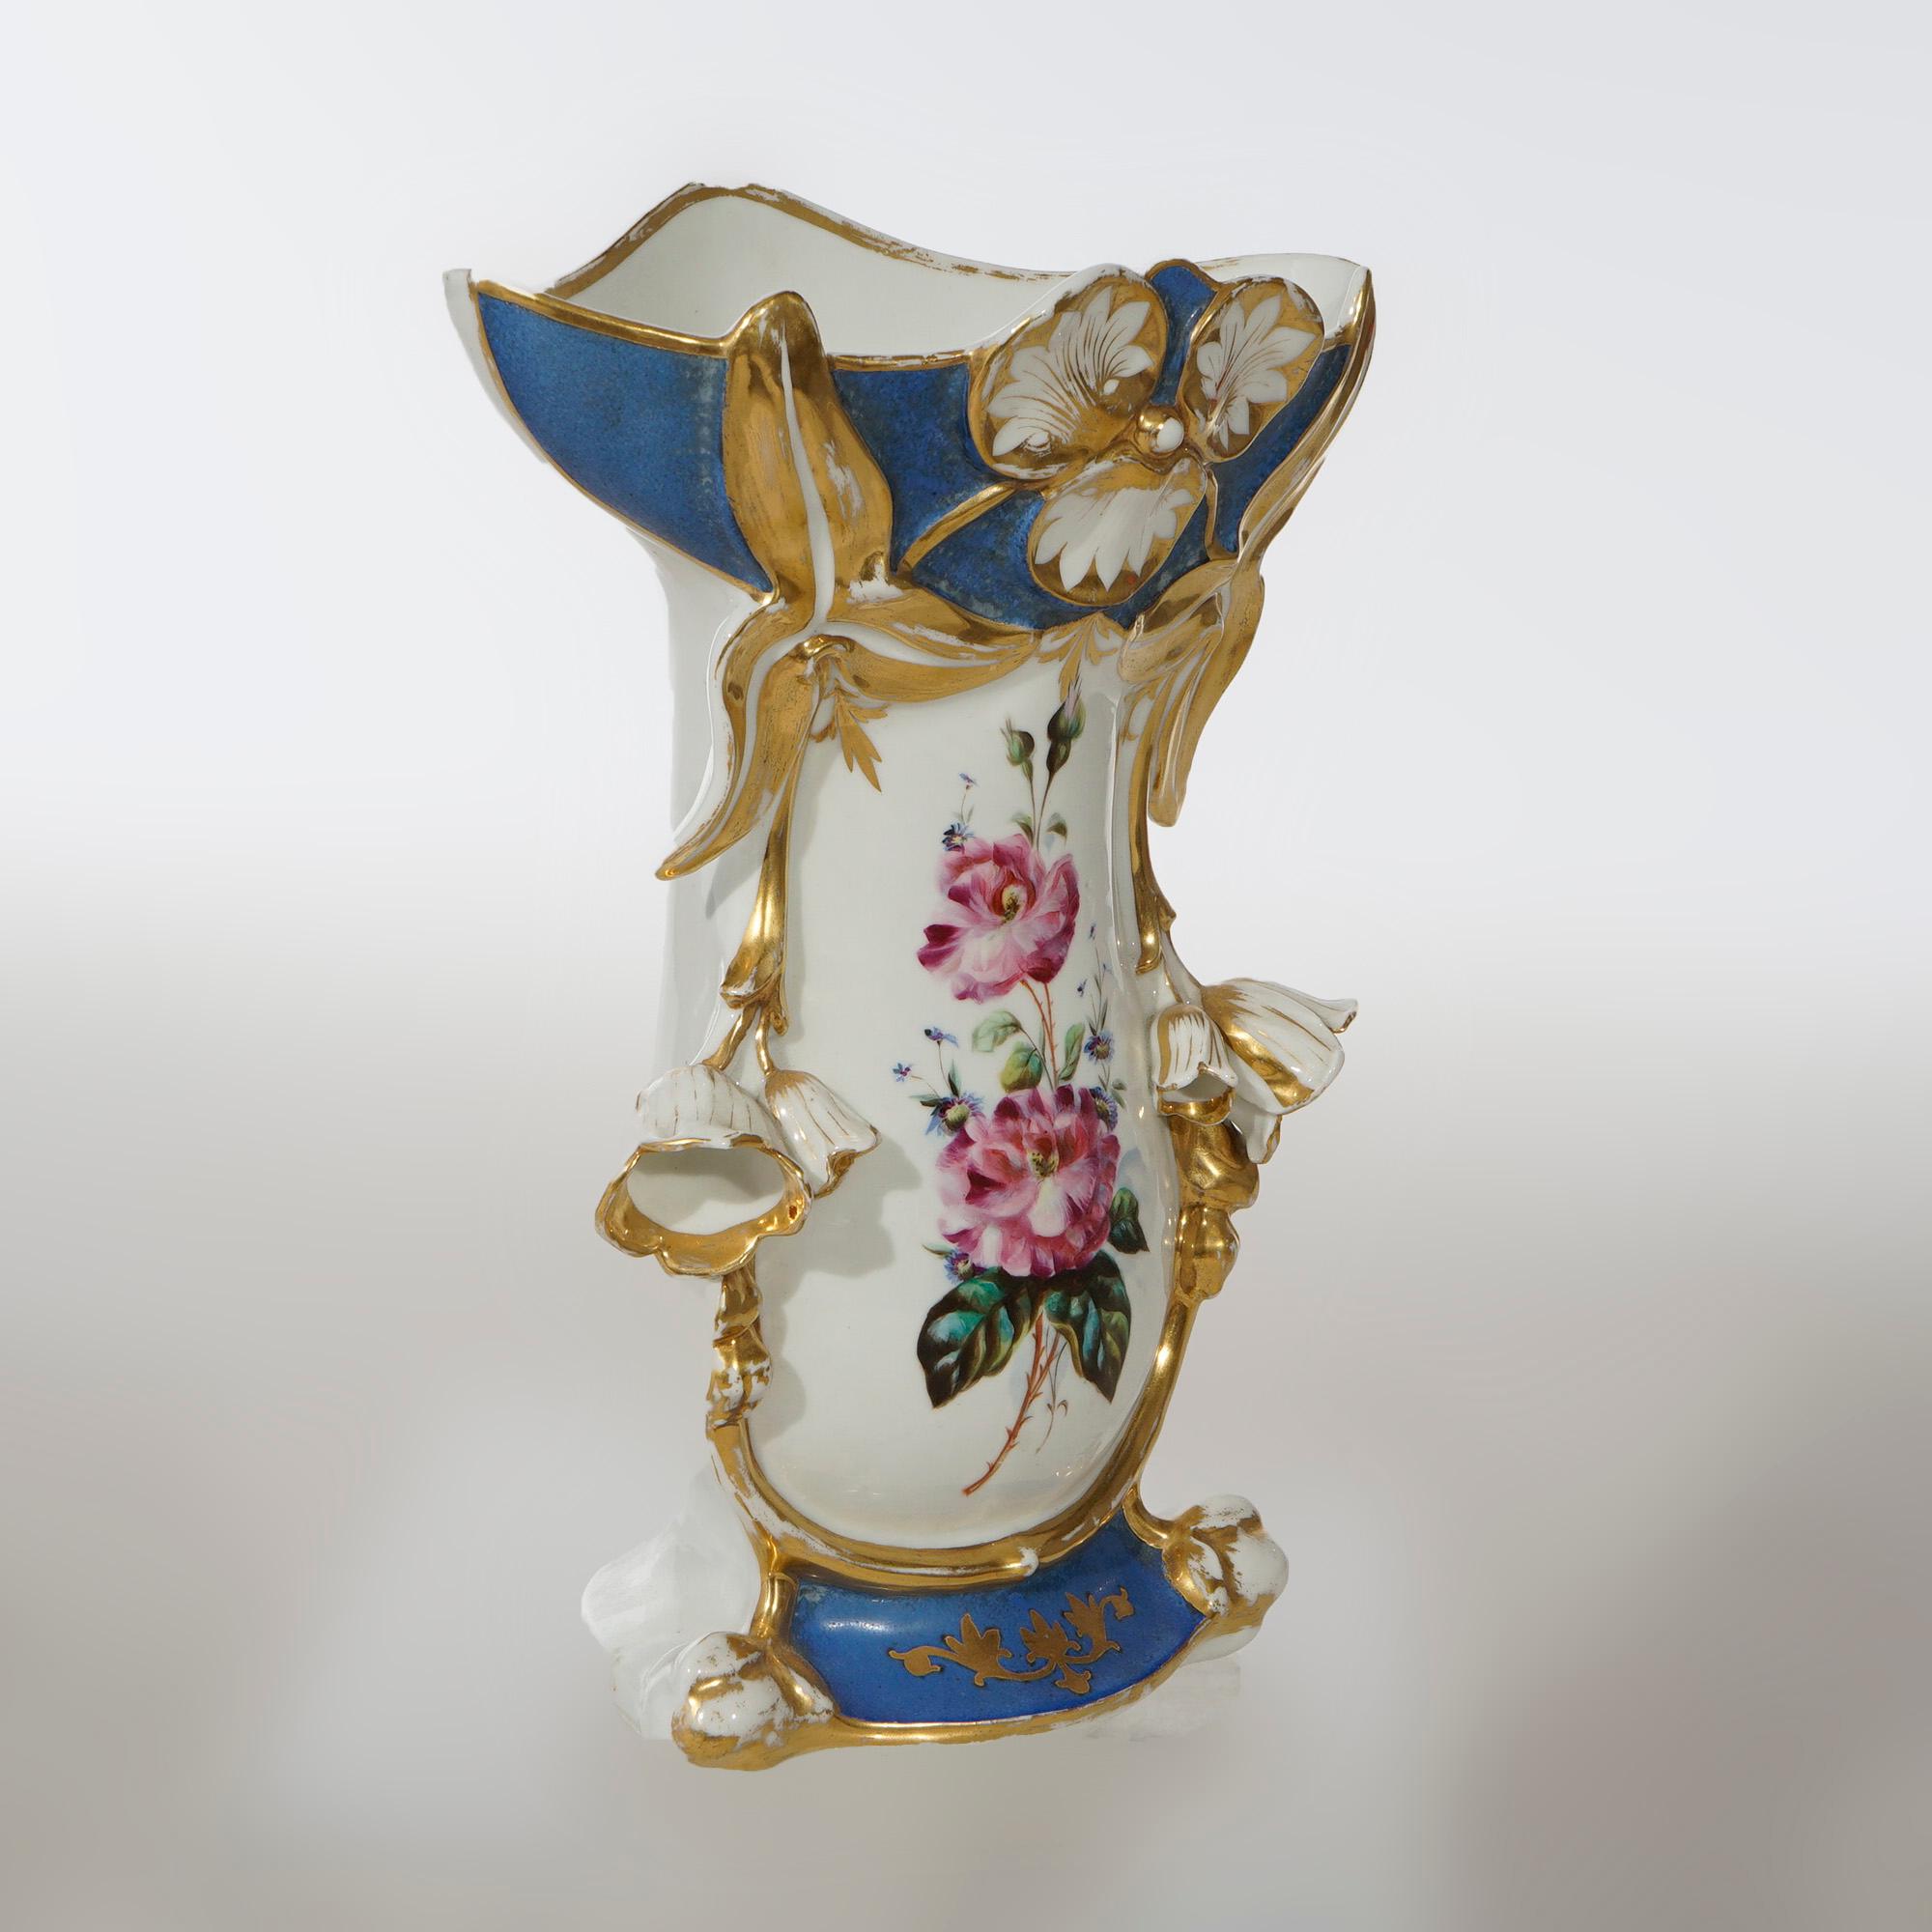 An antique French Old Paris vase offers porcelain footed construction with hand painted blue floral reserve on blue ground with gilt highlights throughout, 19th century

Measures- 13'' H x 9.75'' W x 5.25'' D.